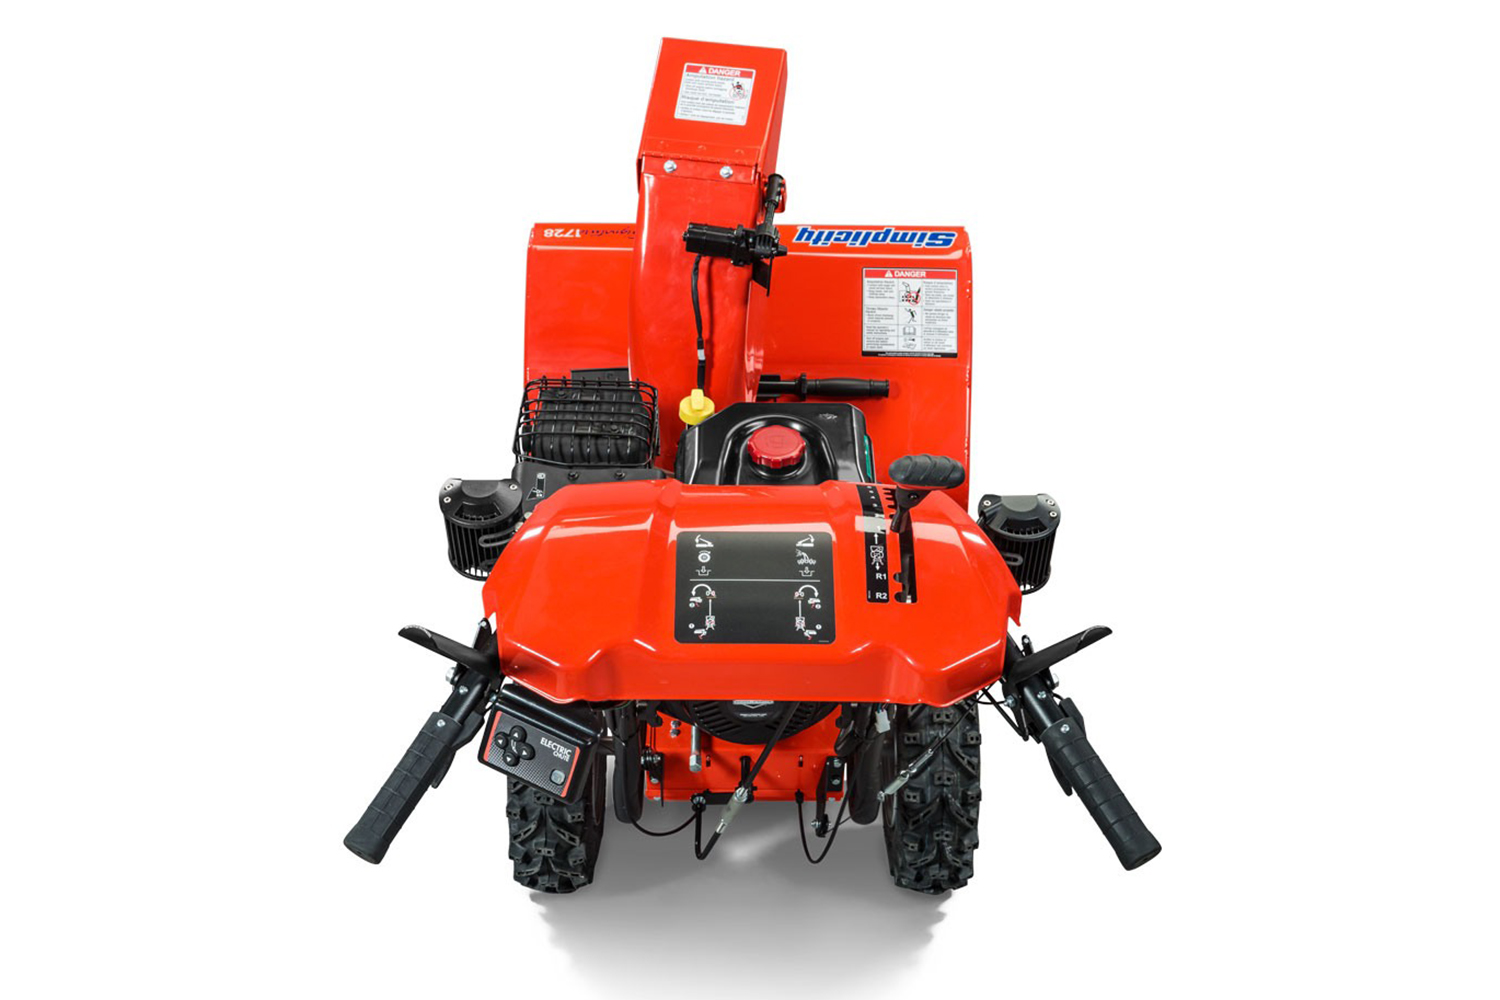 SIMPLICITY SIGNATURE SERIES DUAL-STAGE SNOW BLOWERS 2132<br/>*Model shown in image may vary.